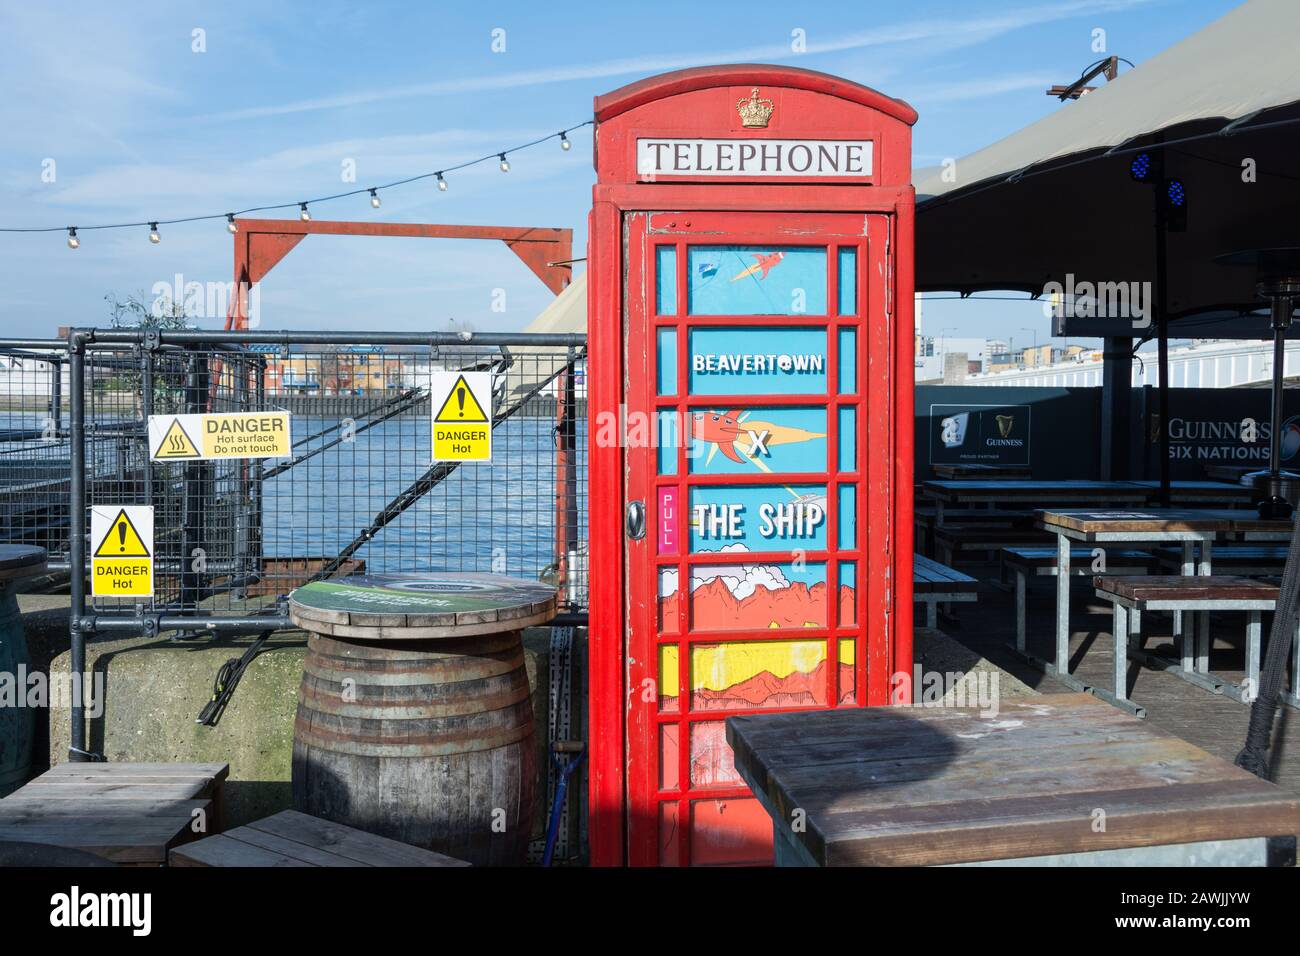 An old red K6 telephone kiosk at the Ship public house in Wandsworth, London, UK Stock Photo